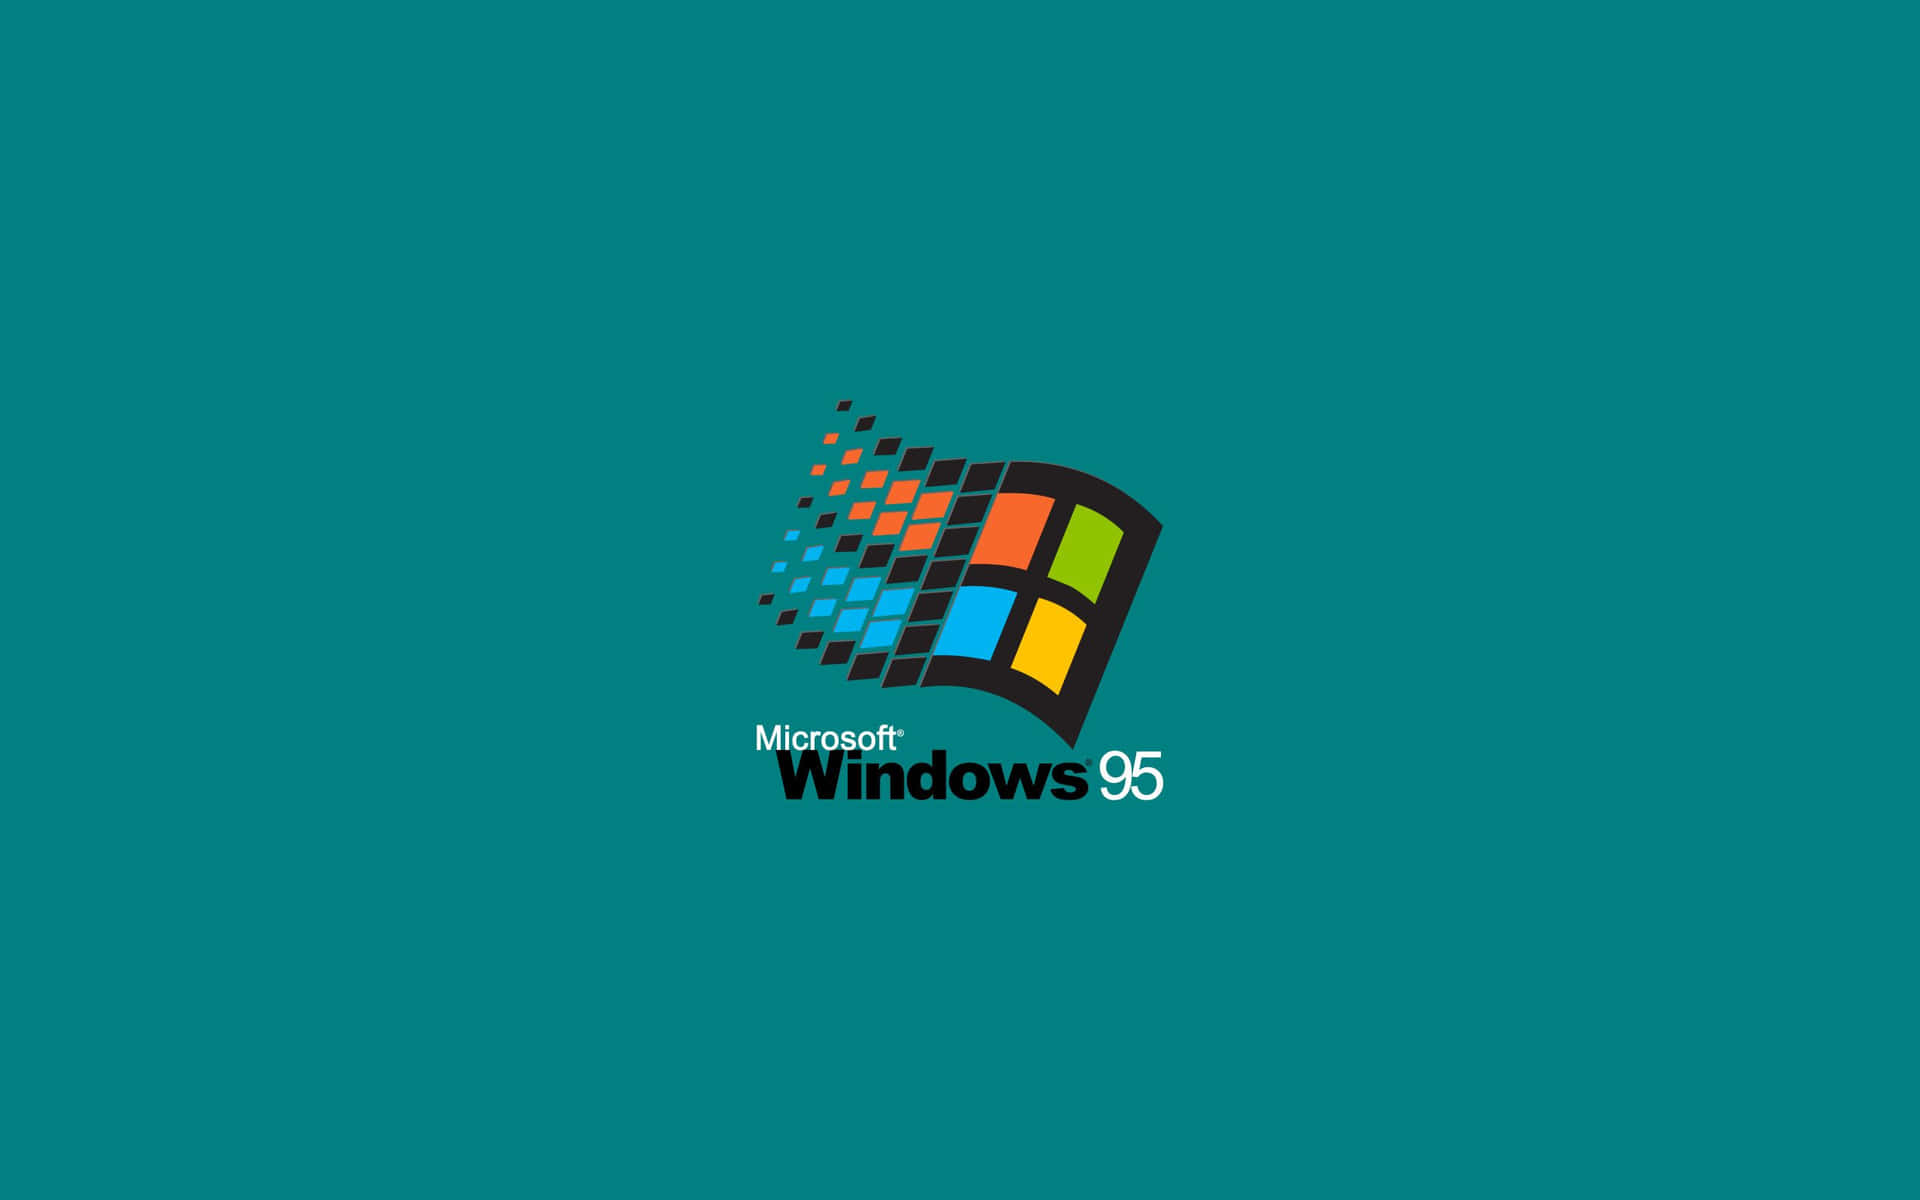 A bright and vibrant Windows Default background